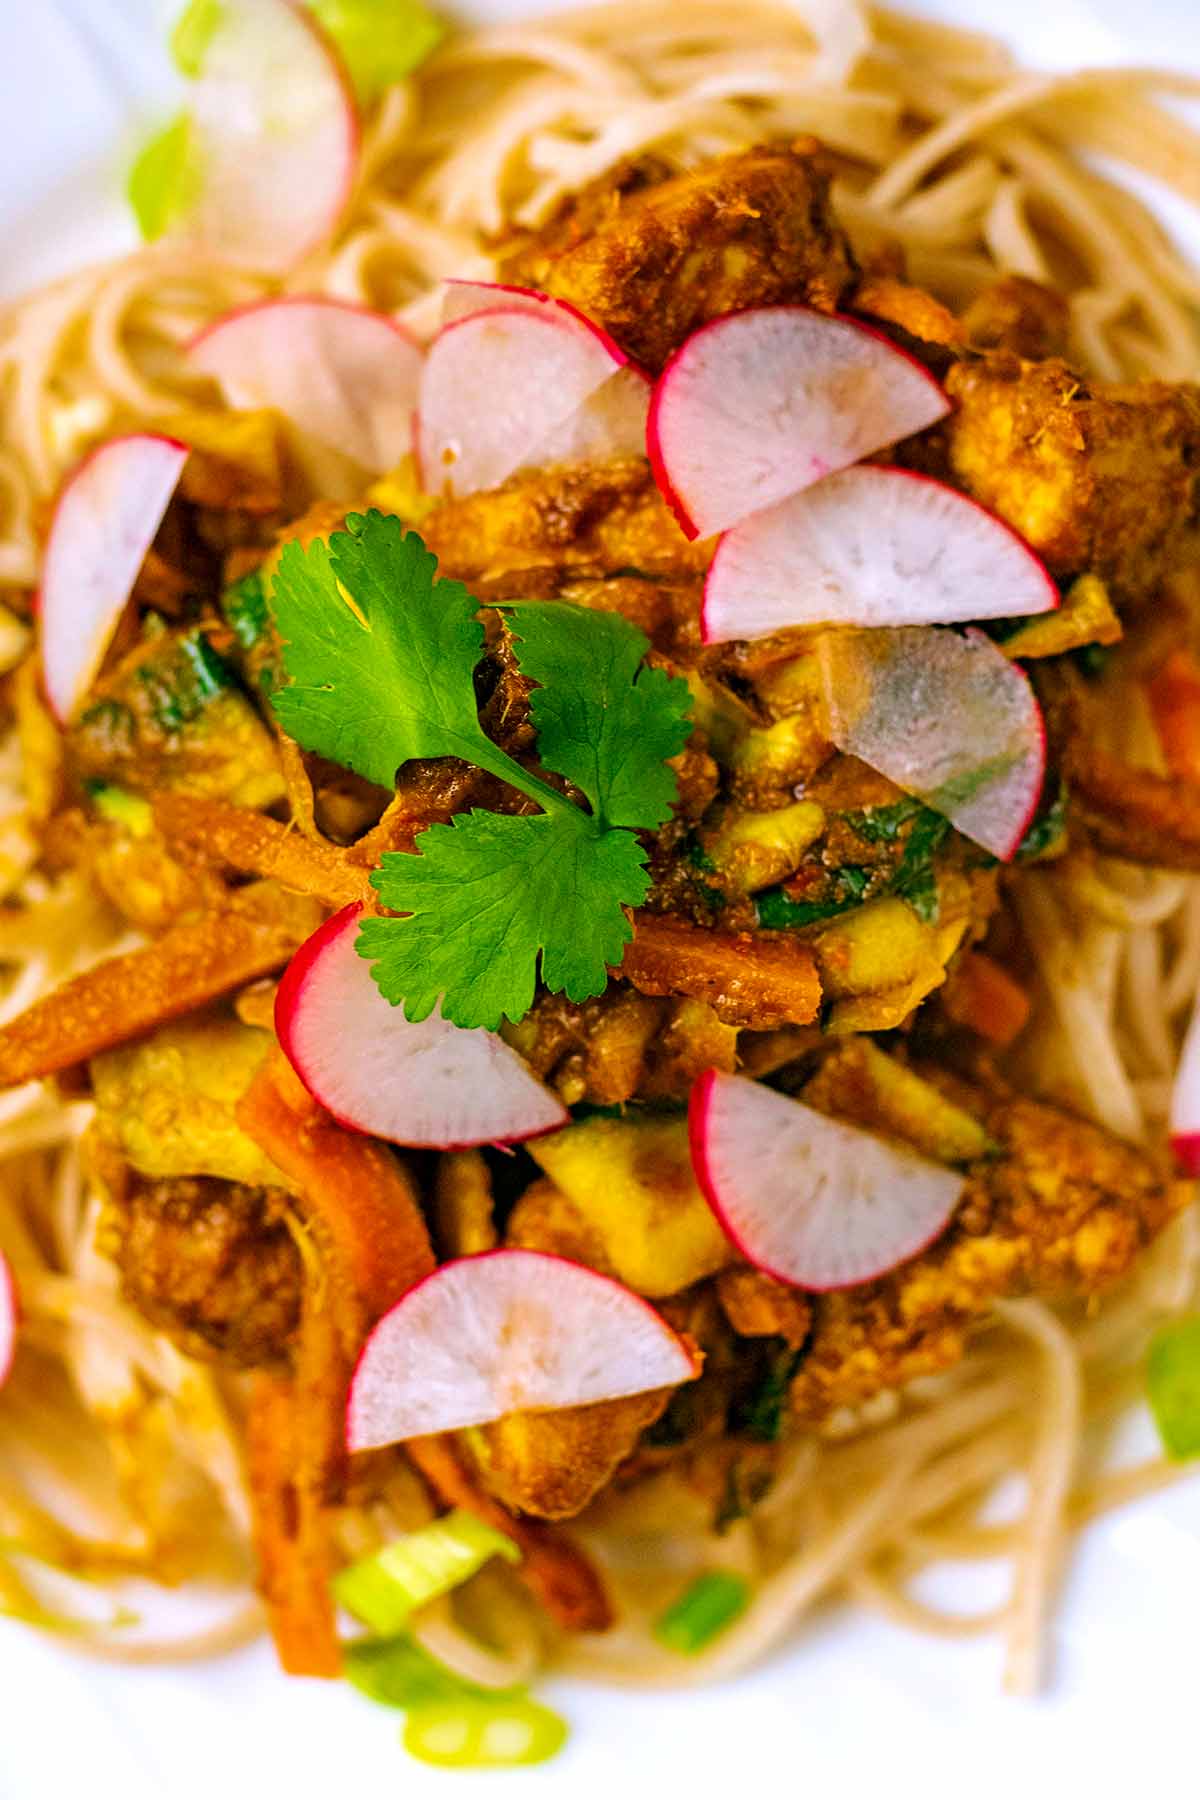 Chicken and vegetable noodles topped with slices of radish and a coriander leaf.